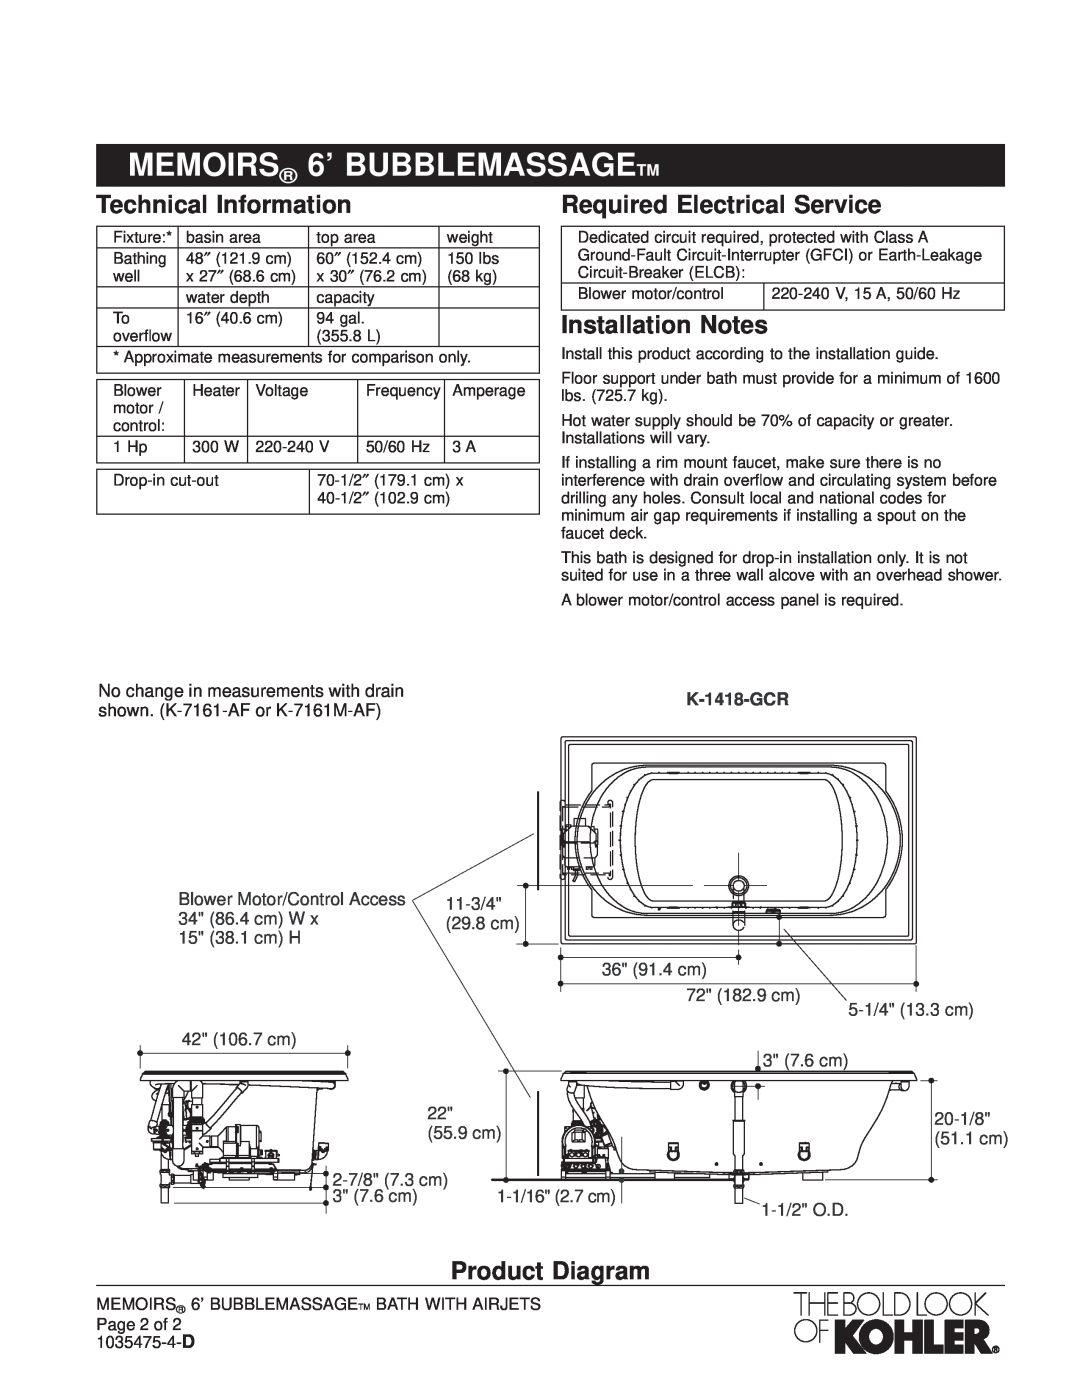 Kohler K-1418-GCR manual MEMOIRS 6 BUBBLEMASSAGETM, Technical Information, Required Electrical Service, Installation Notes 